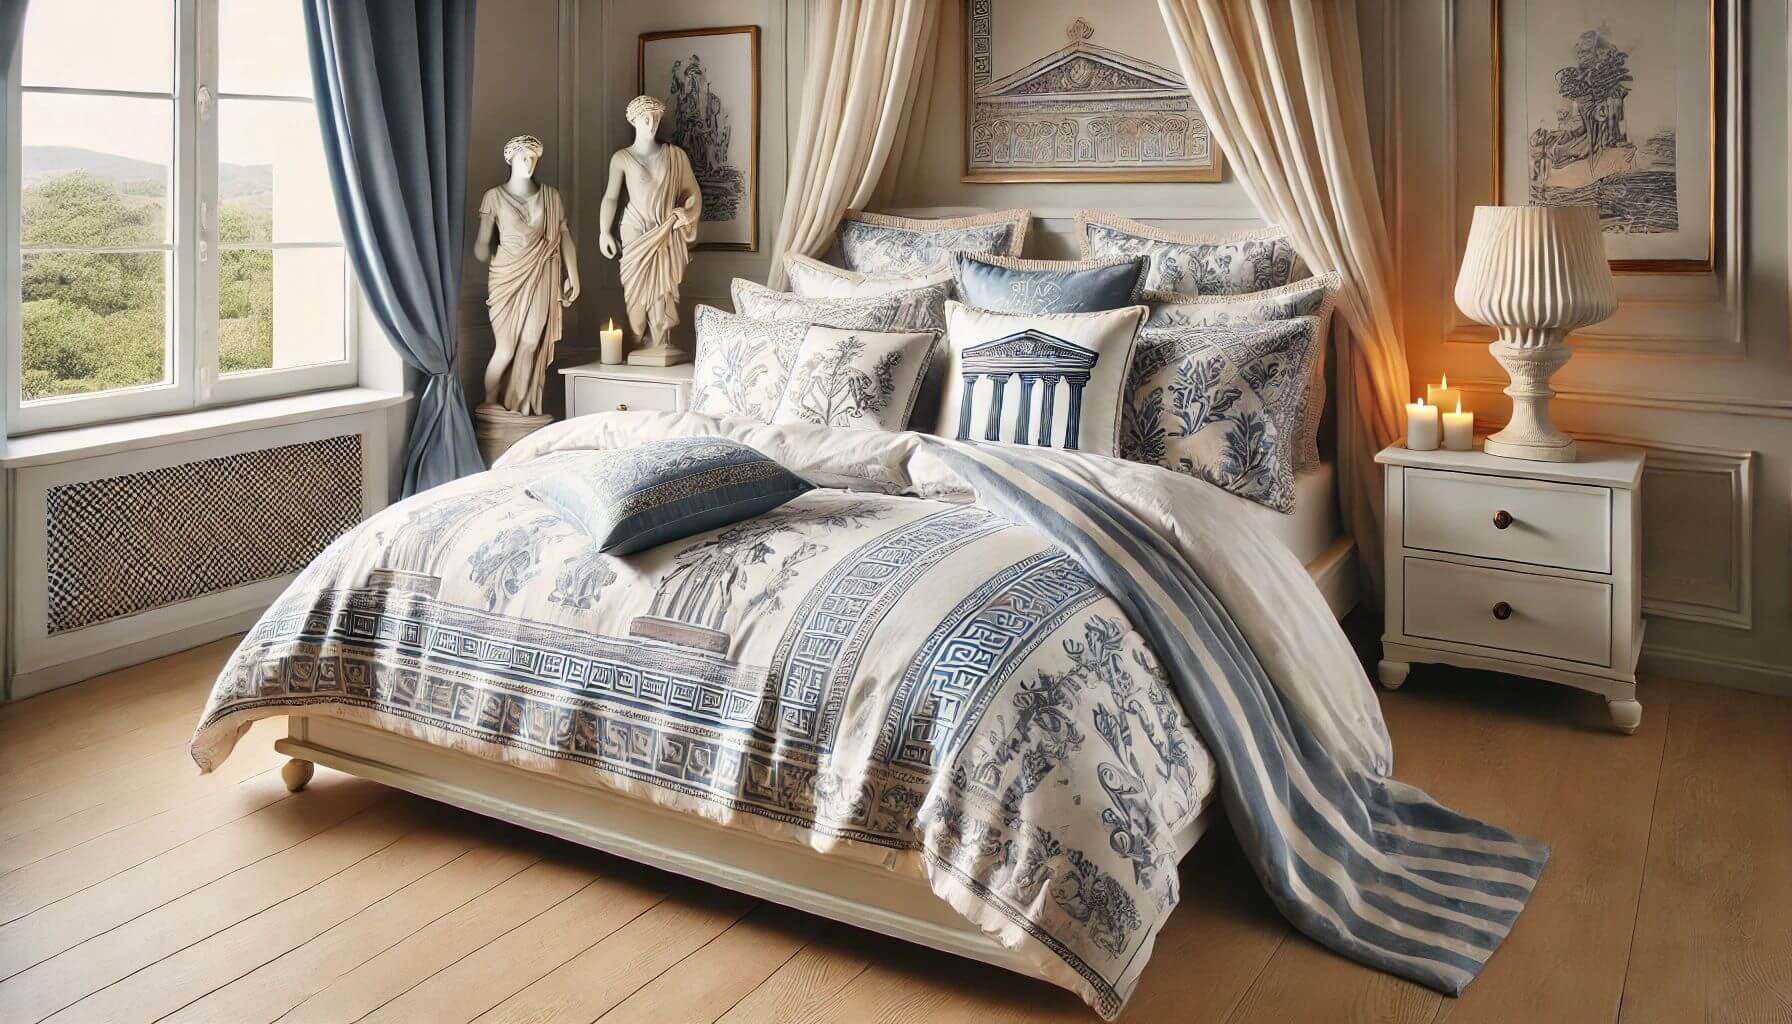 How to Choose the Perfect Greek-Inspired Bedding